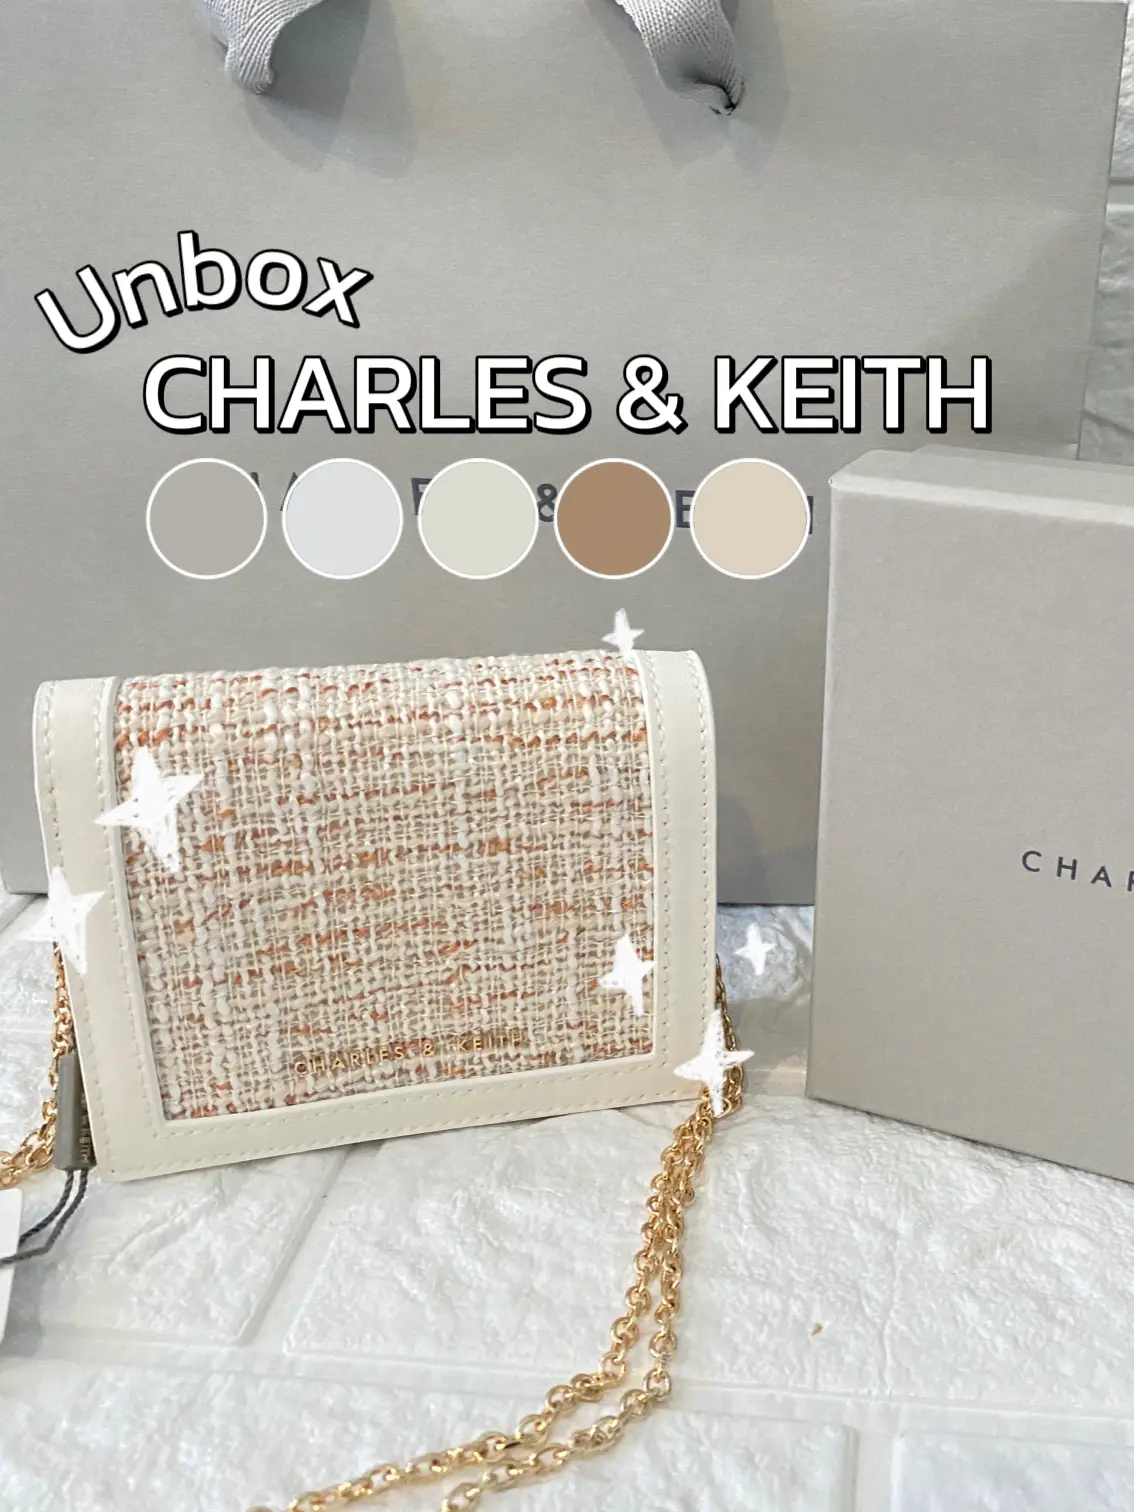 CHARLES & KEITH x Singapore Airlines Collaboration - CHARLES & KEITH SG